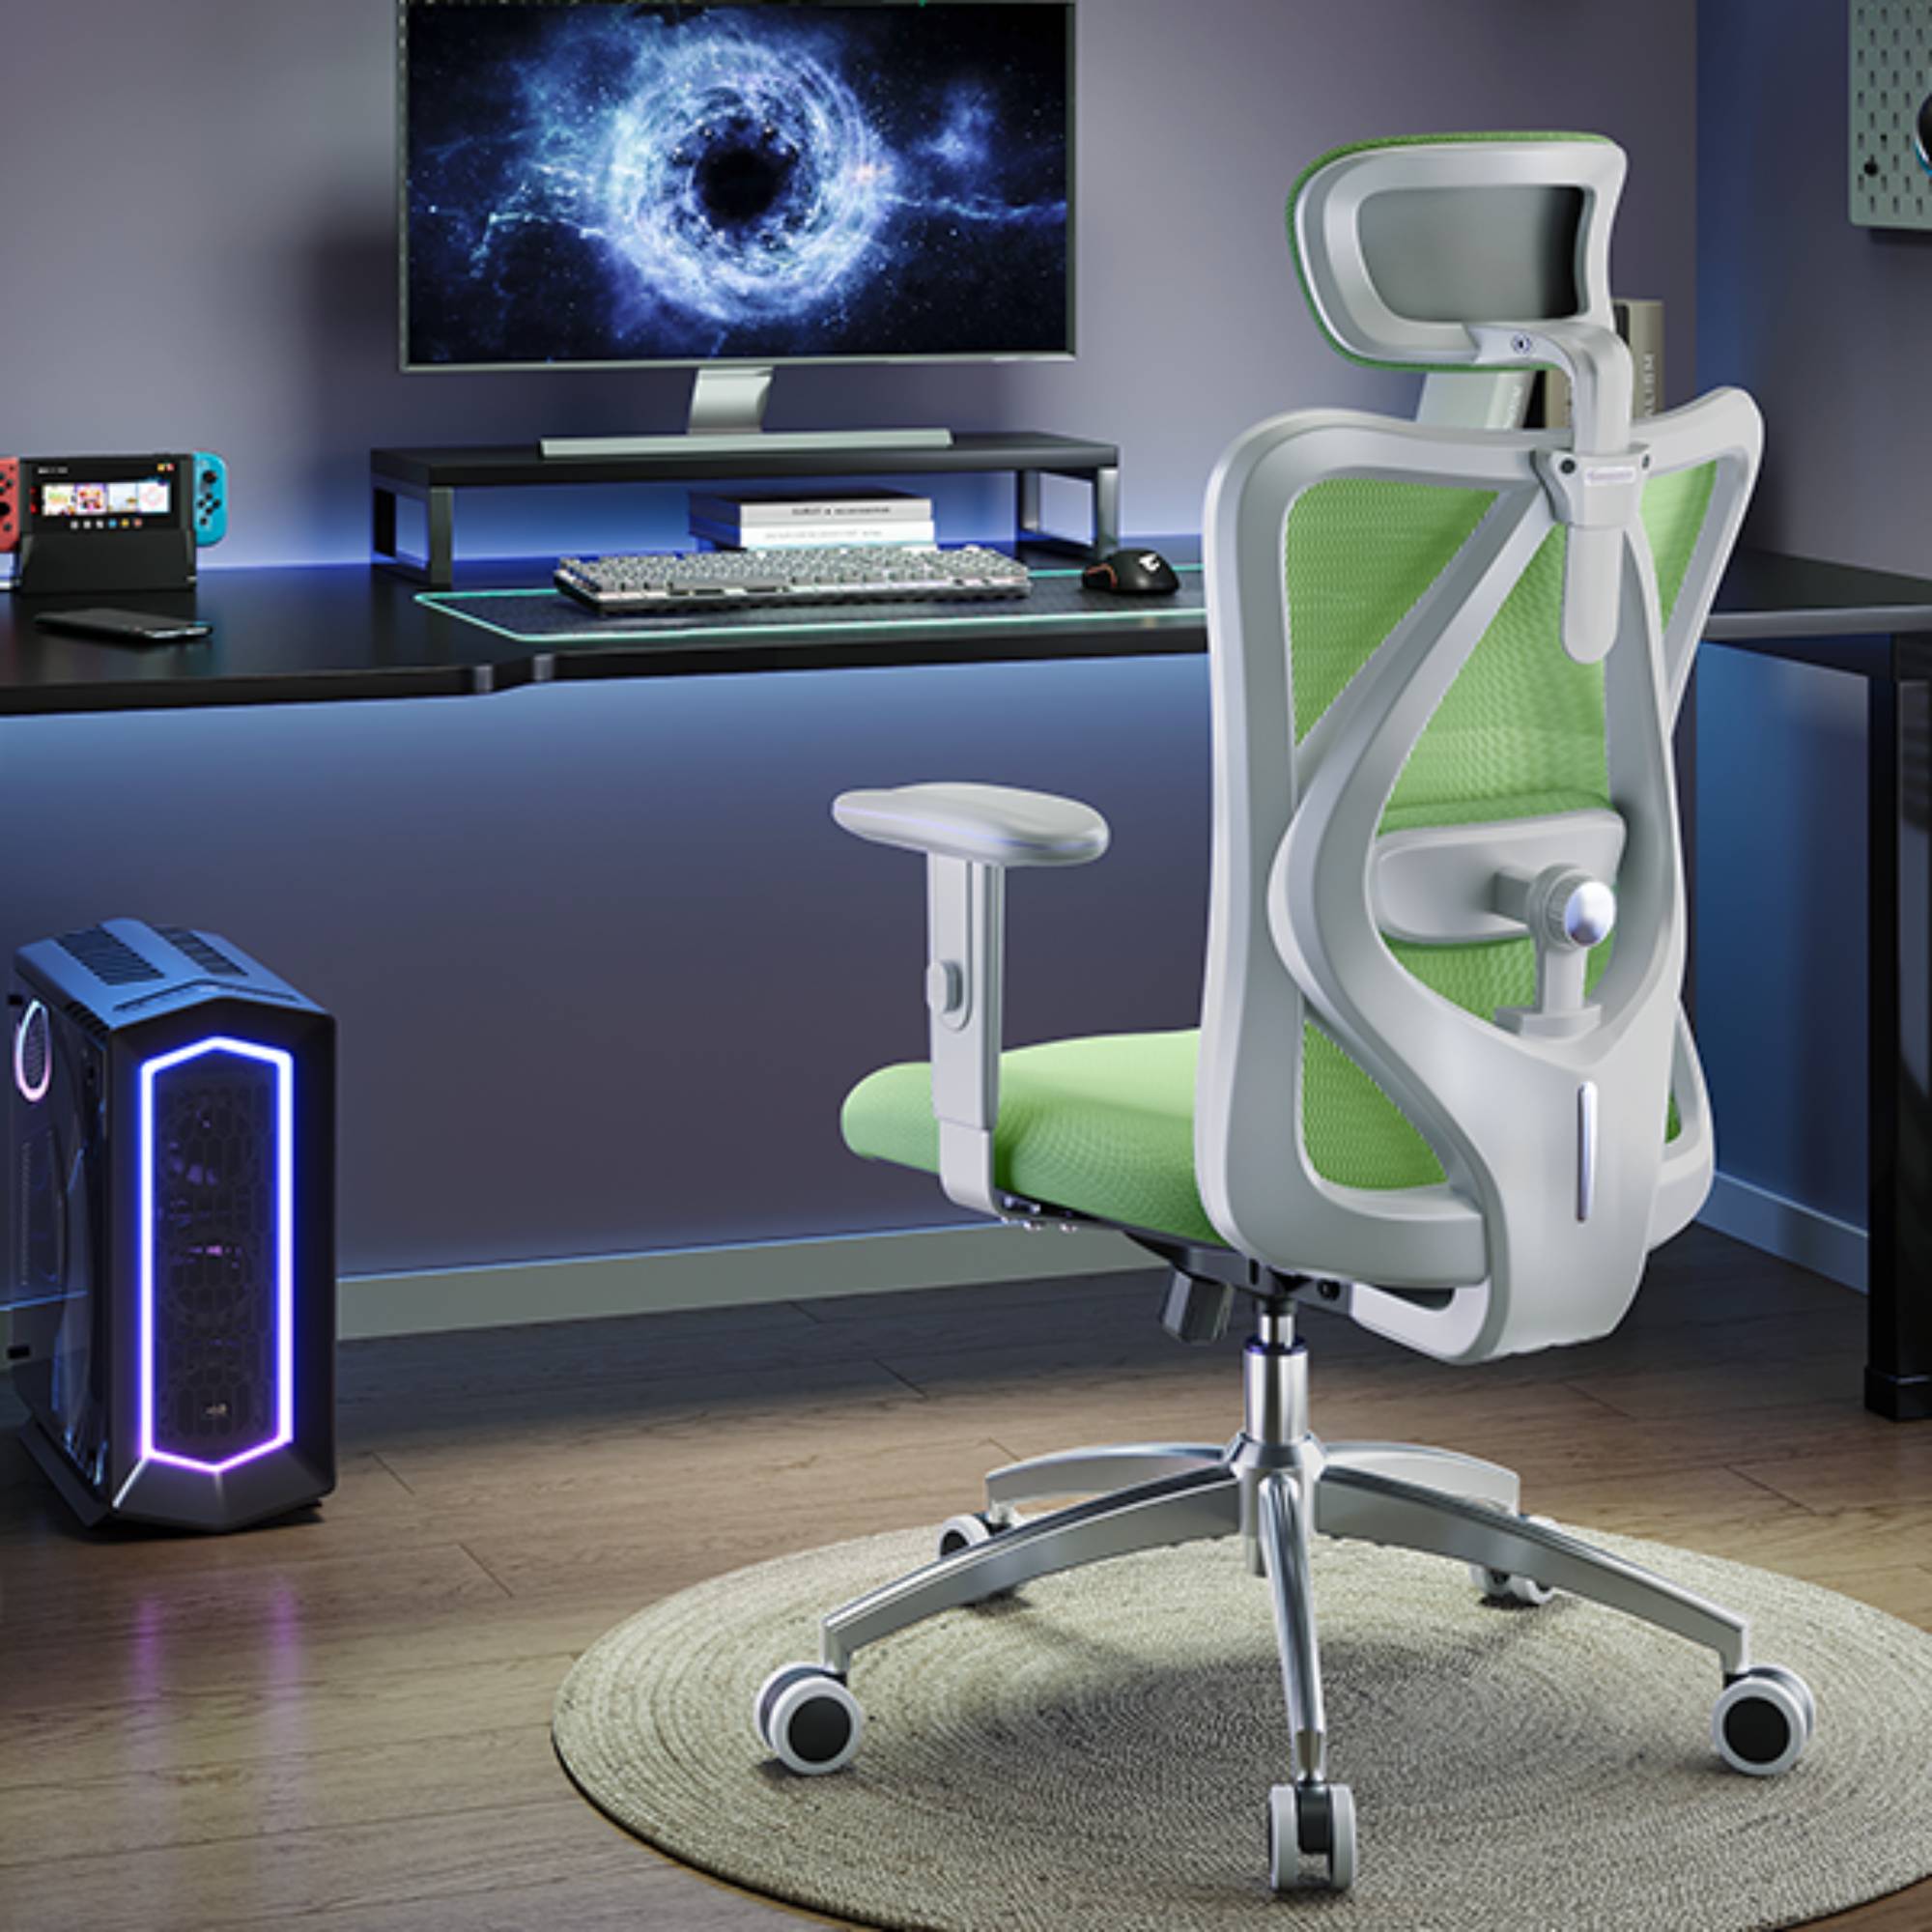 SIHOO Ergonomic Office Chair, Mesh Computer Desk Chair with Adjustable Lumbar Support, High Back chair for Big and Tall, White and Green - image 3 of 11